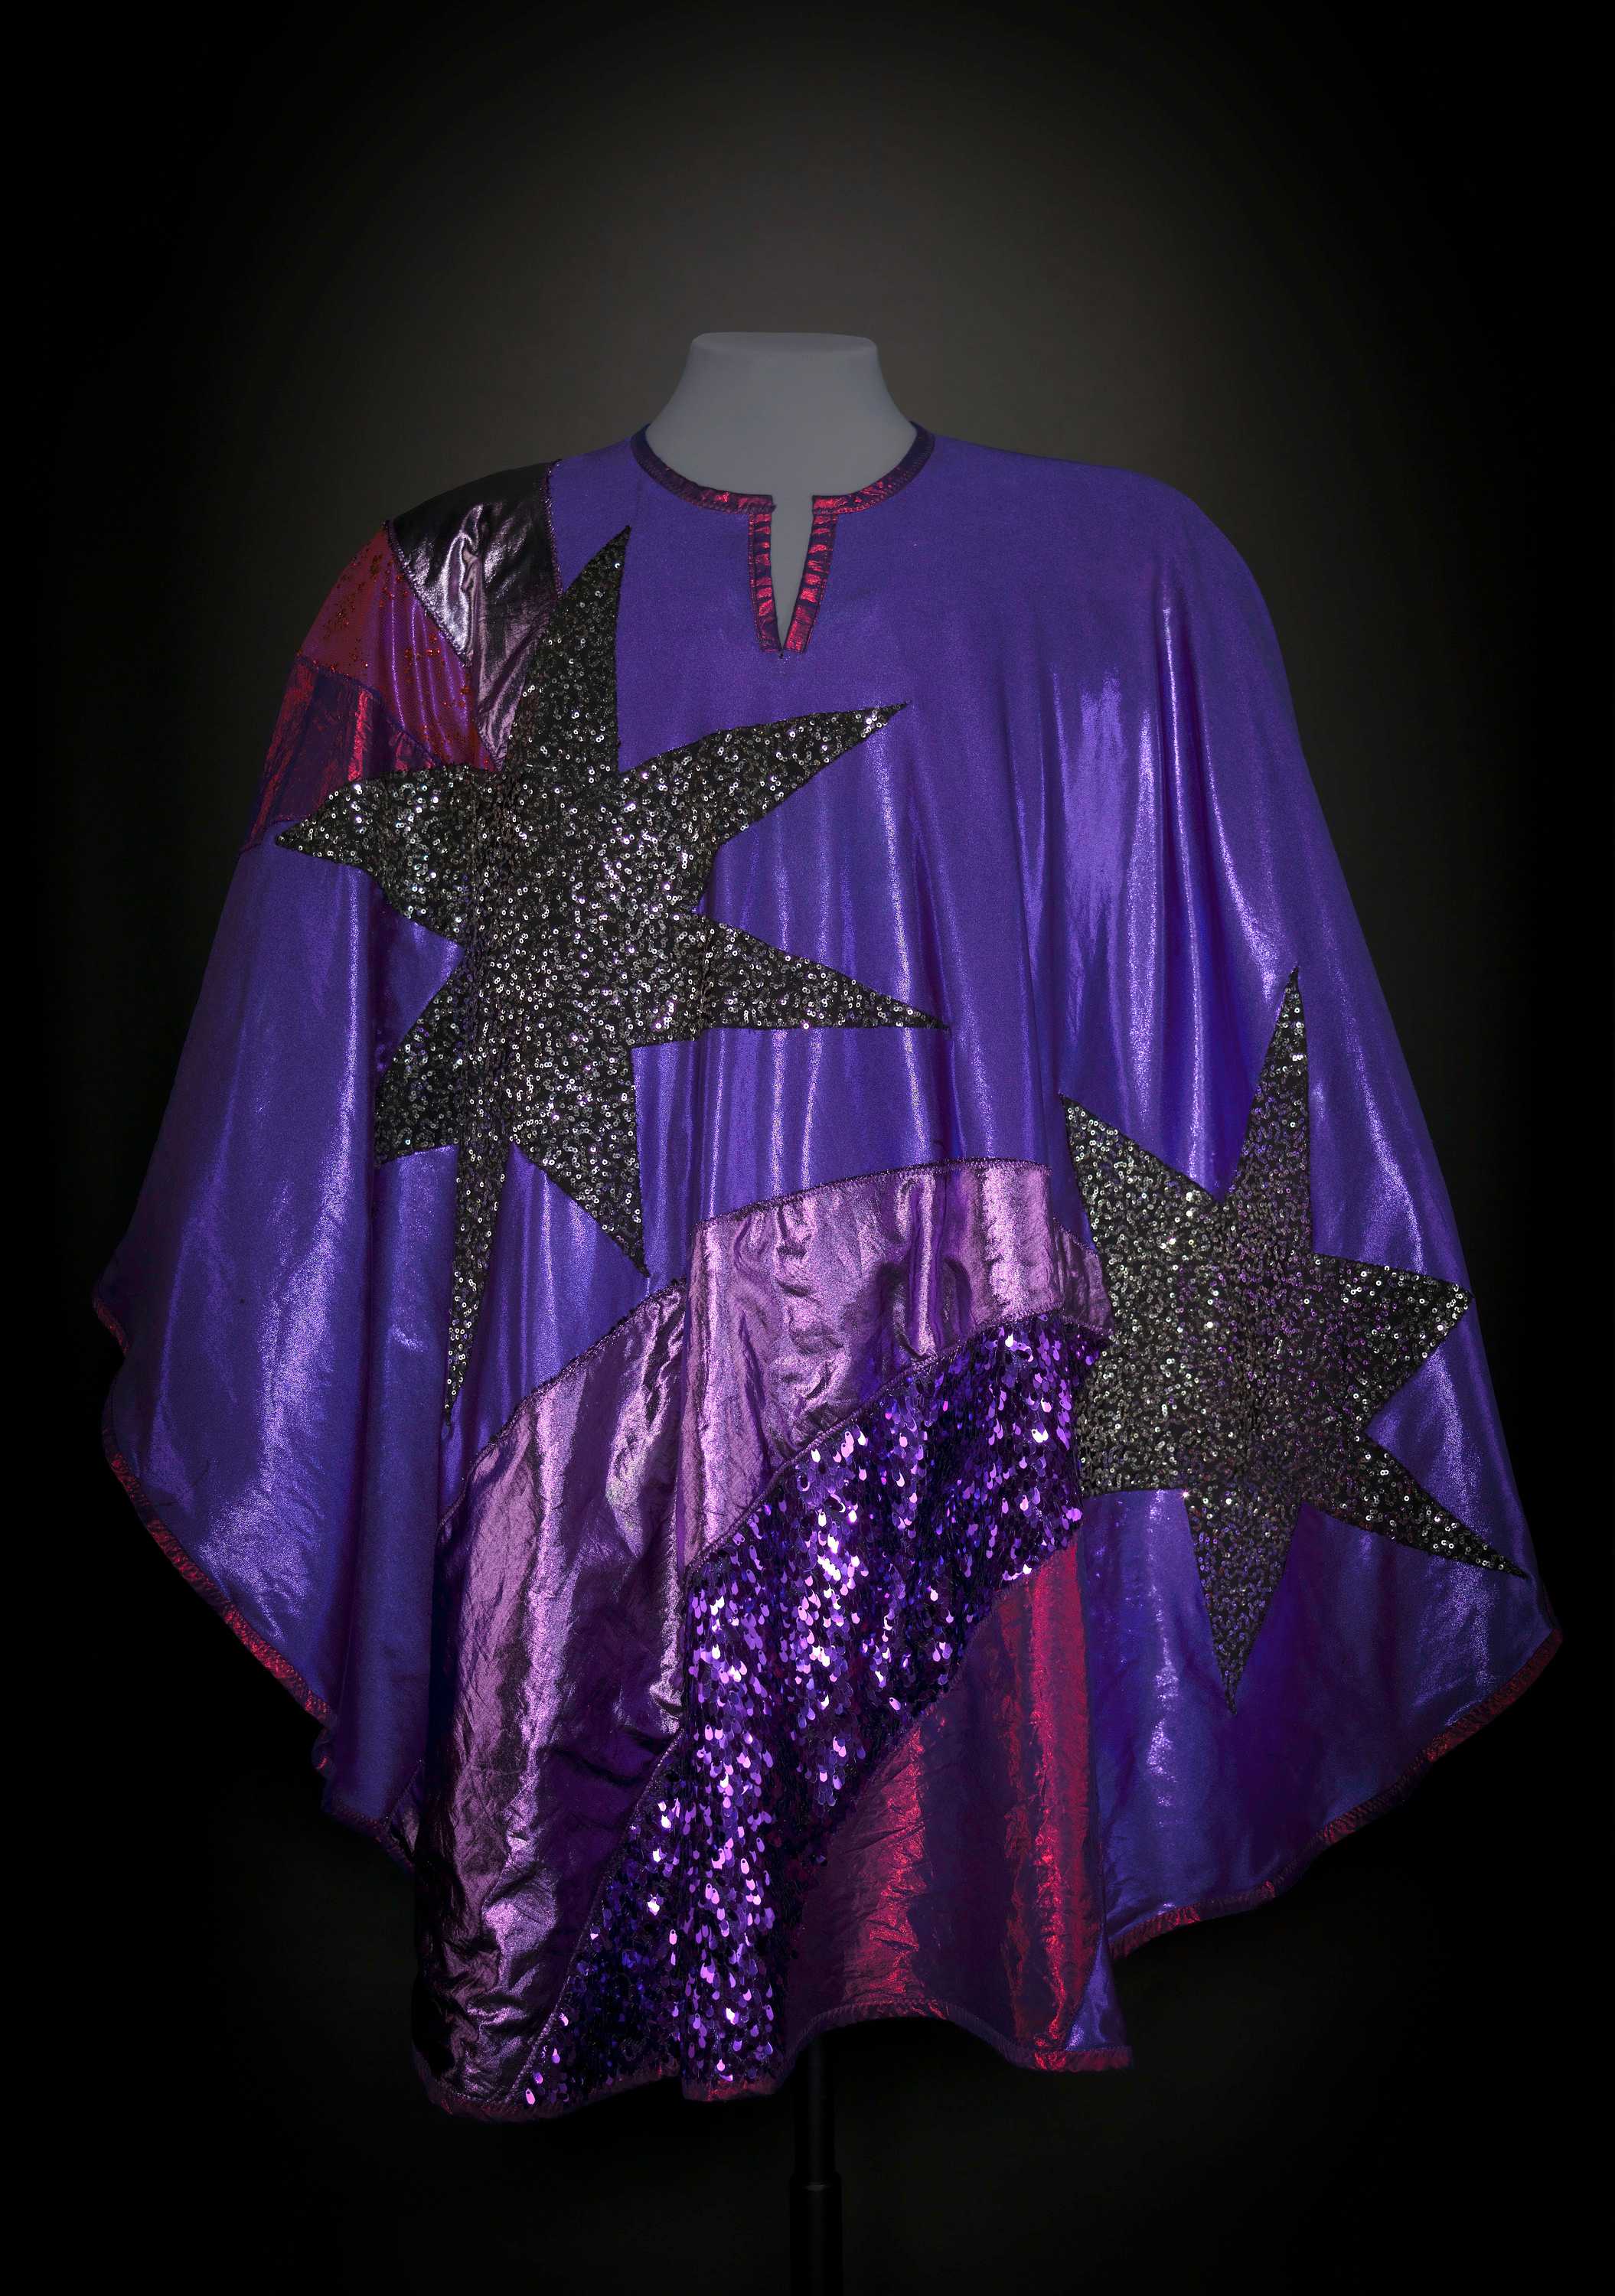 A purple poncho with different shades of purple and patterned strips and large sequences gray stars.